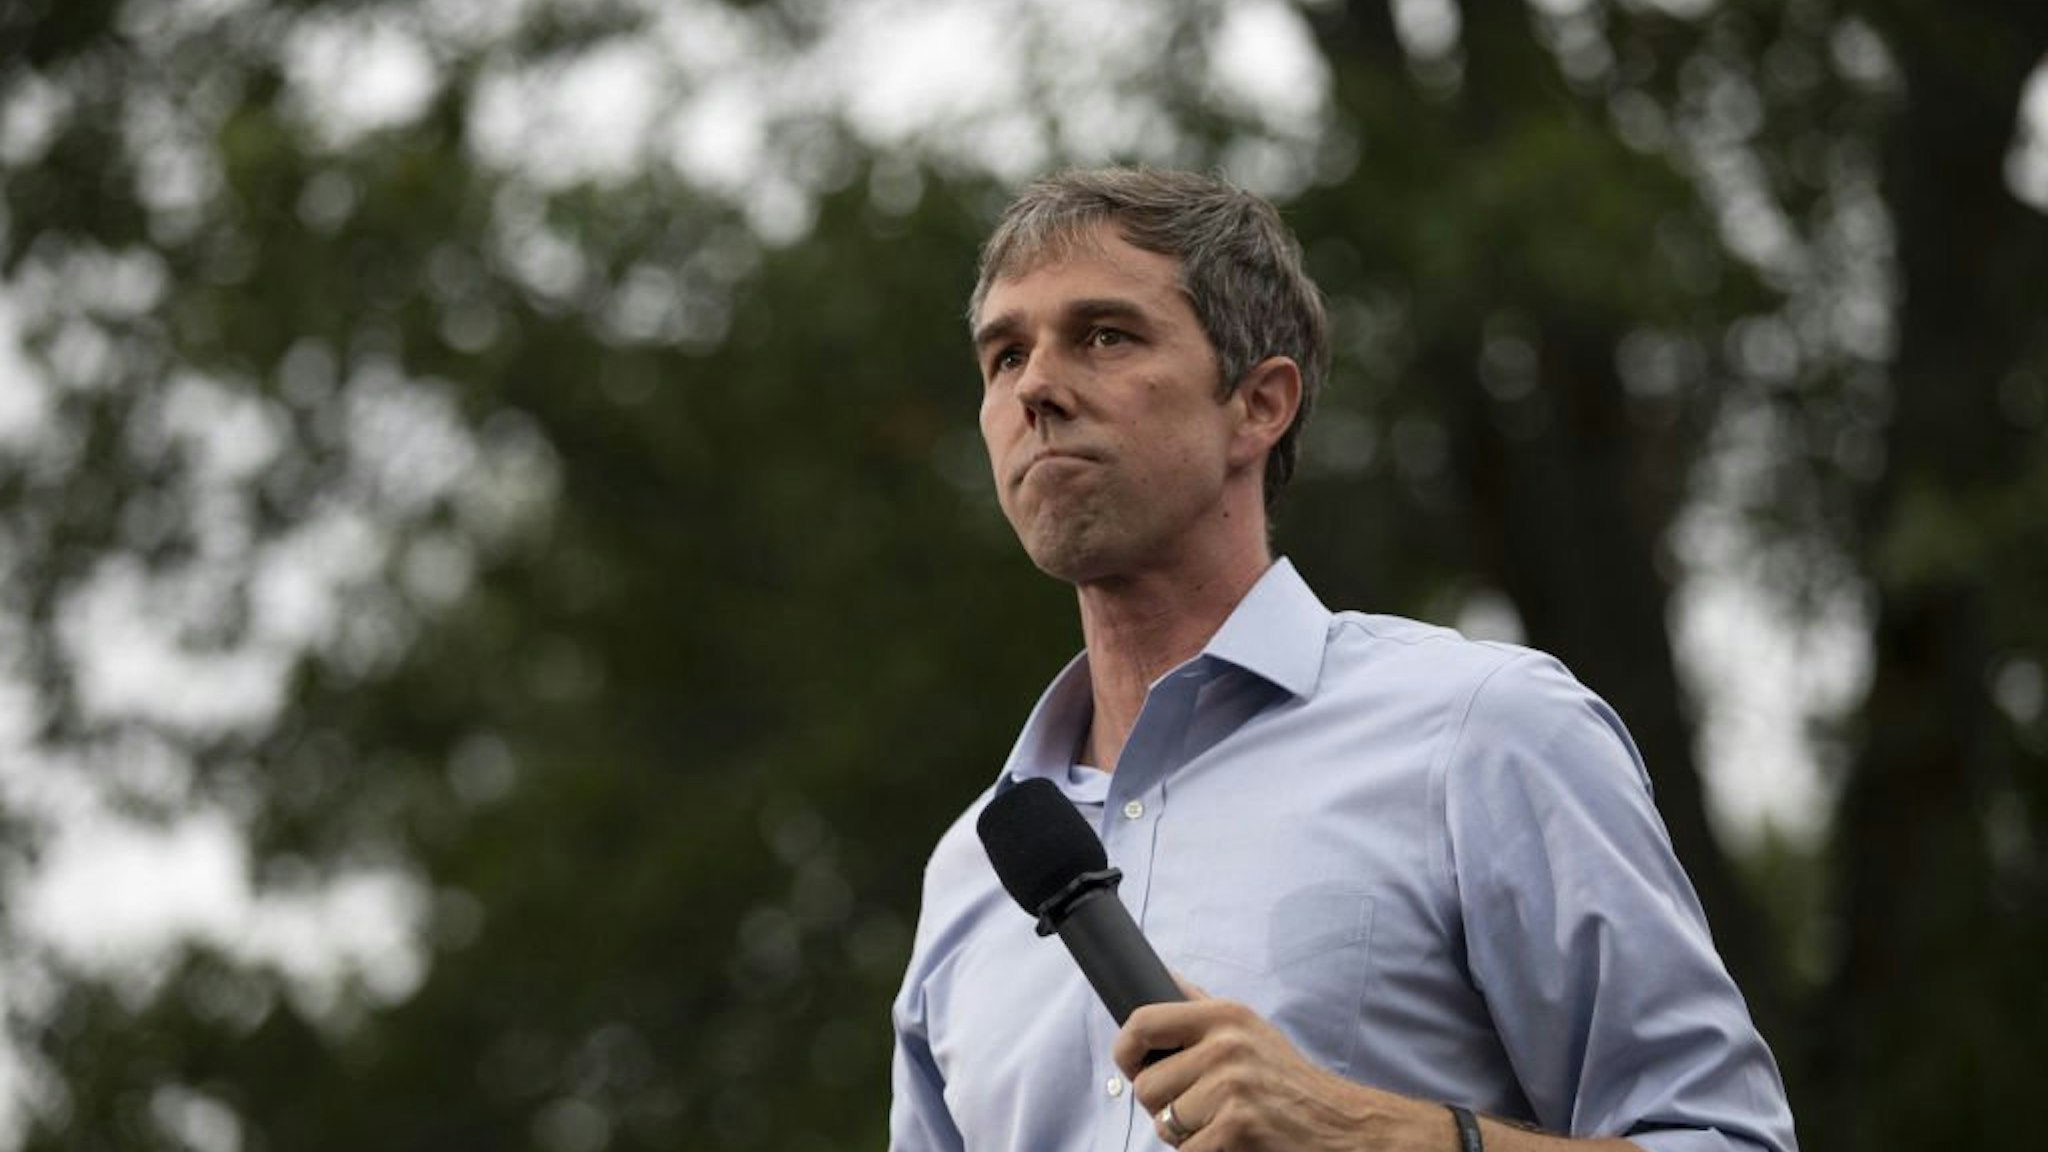 Beto O'Rourke pauses while speaking at the Polk County Steak Fry in Des Moines, Iowa.